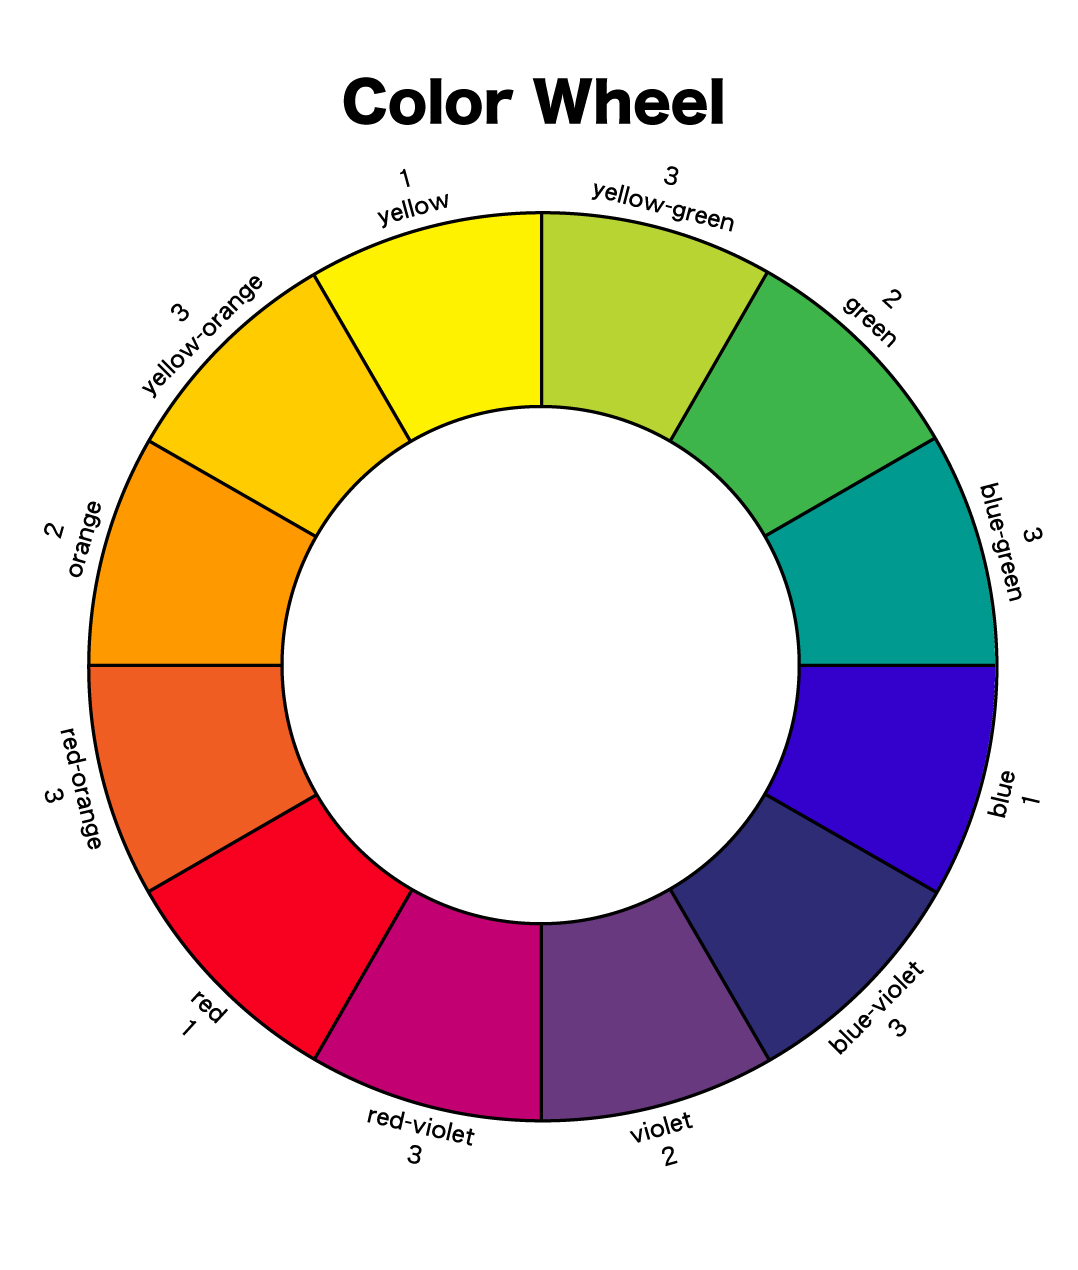 Green is the exact opposite of red on the color wheel.